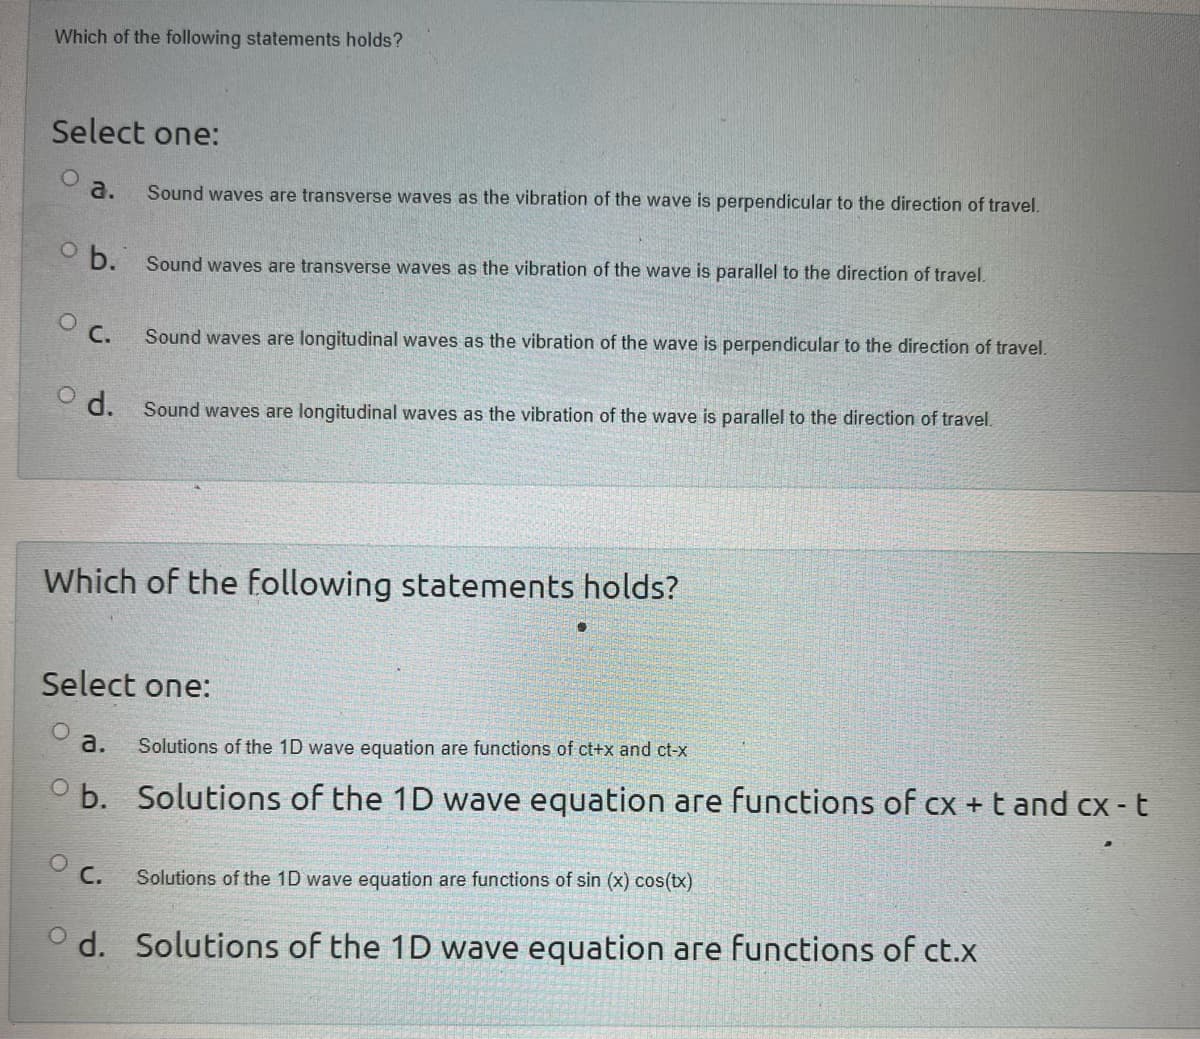 Which of the following statements holds?
Select one:
Sound waves are transverse waves as the vibration of the wave is perpendicular to the direction of travel.
b. Sound waves are transverse waves as the vibration of the wave is parallel to the direction of travel.
a.
O C.
od.
Which of the following statements holds?
a.
ob.
Sound waves are longitudinal waves as the vibration of the wave is perpendicular to the direction of travel.
Select one:
O
OC.
Sound waves are longitudinal waves as the vibration of the wave is parallel to the direction of travel.
od.
Solutions of the 1D wave equation are functions of ct+x and ct-x
Solutions of the 1D wave equation are functions of cx + t and cx - t
Solutions of the 1D wave equation are functions of sin (x) cos(tx)
Solutions of the 1D wave equation are functions of ct.x